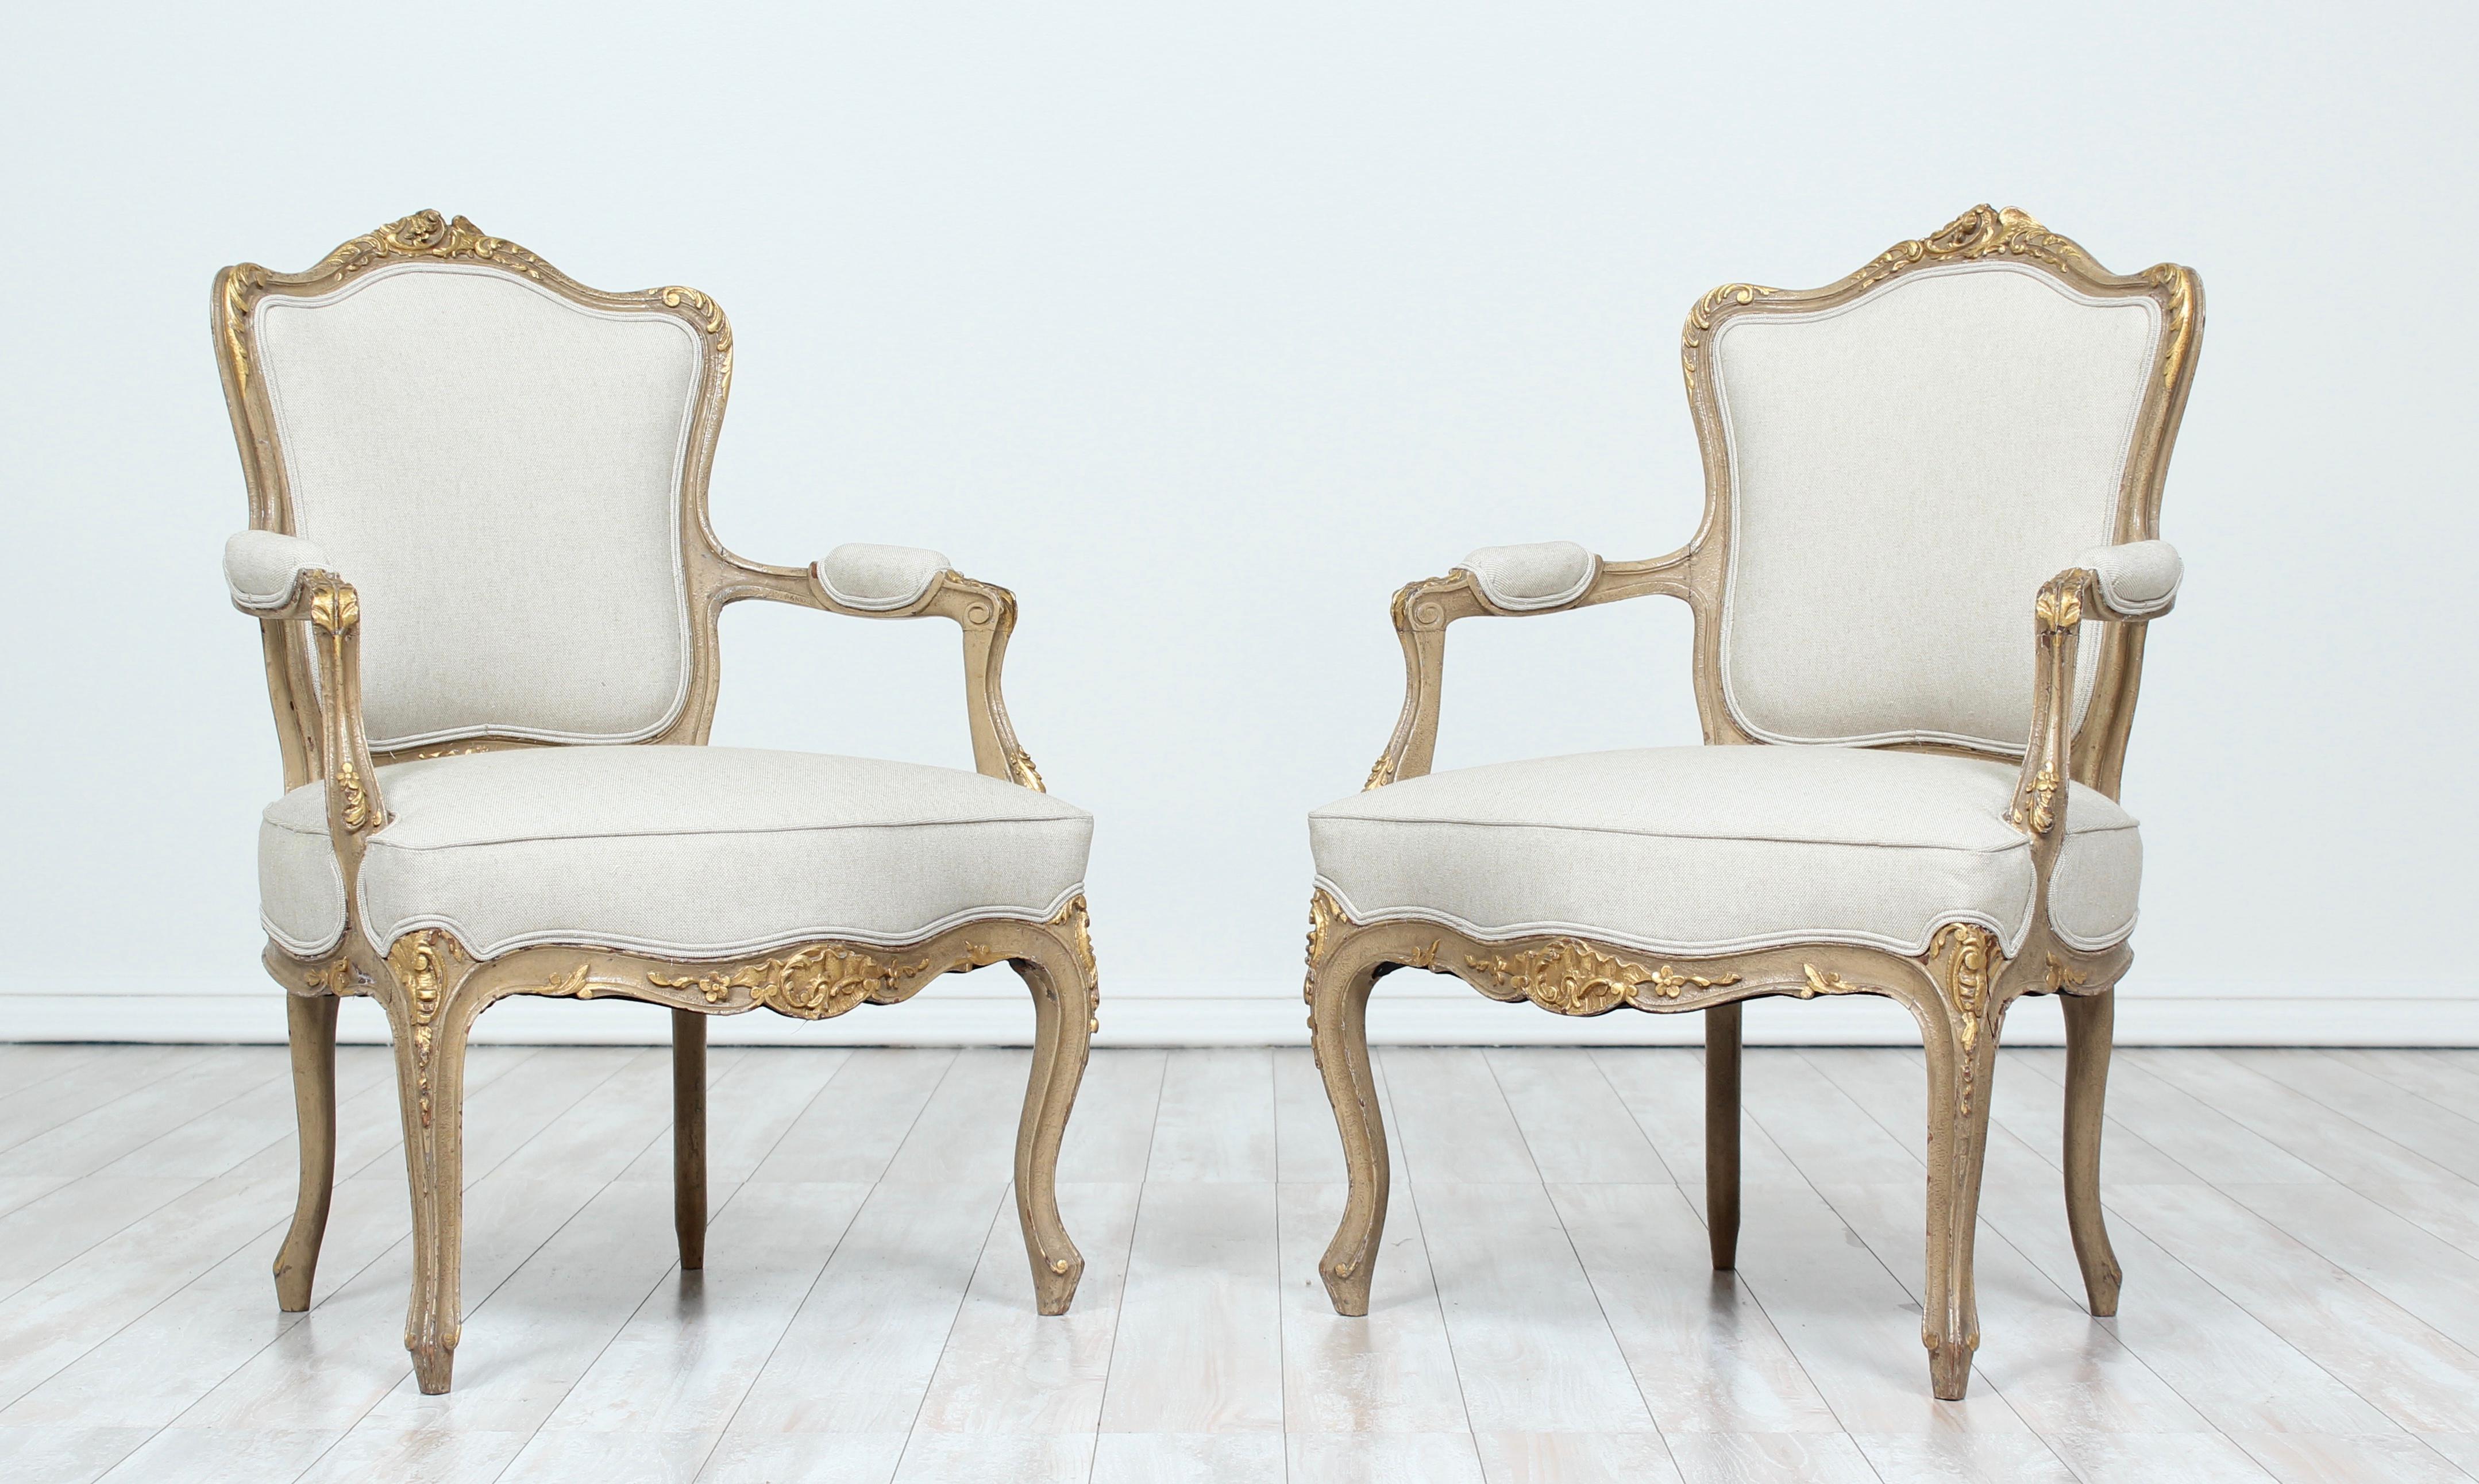 Beautiful, 1920s petite-scale French Louis XV-style painted and parcel-gilt fauteuils with delicately carved rocaille, floral and angel wing decorations. New linen canvas upholstery.    

These beautiful chairs are perfect for a child’s room or any